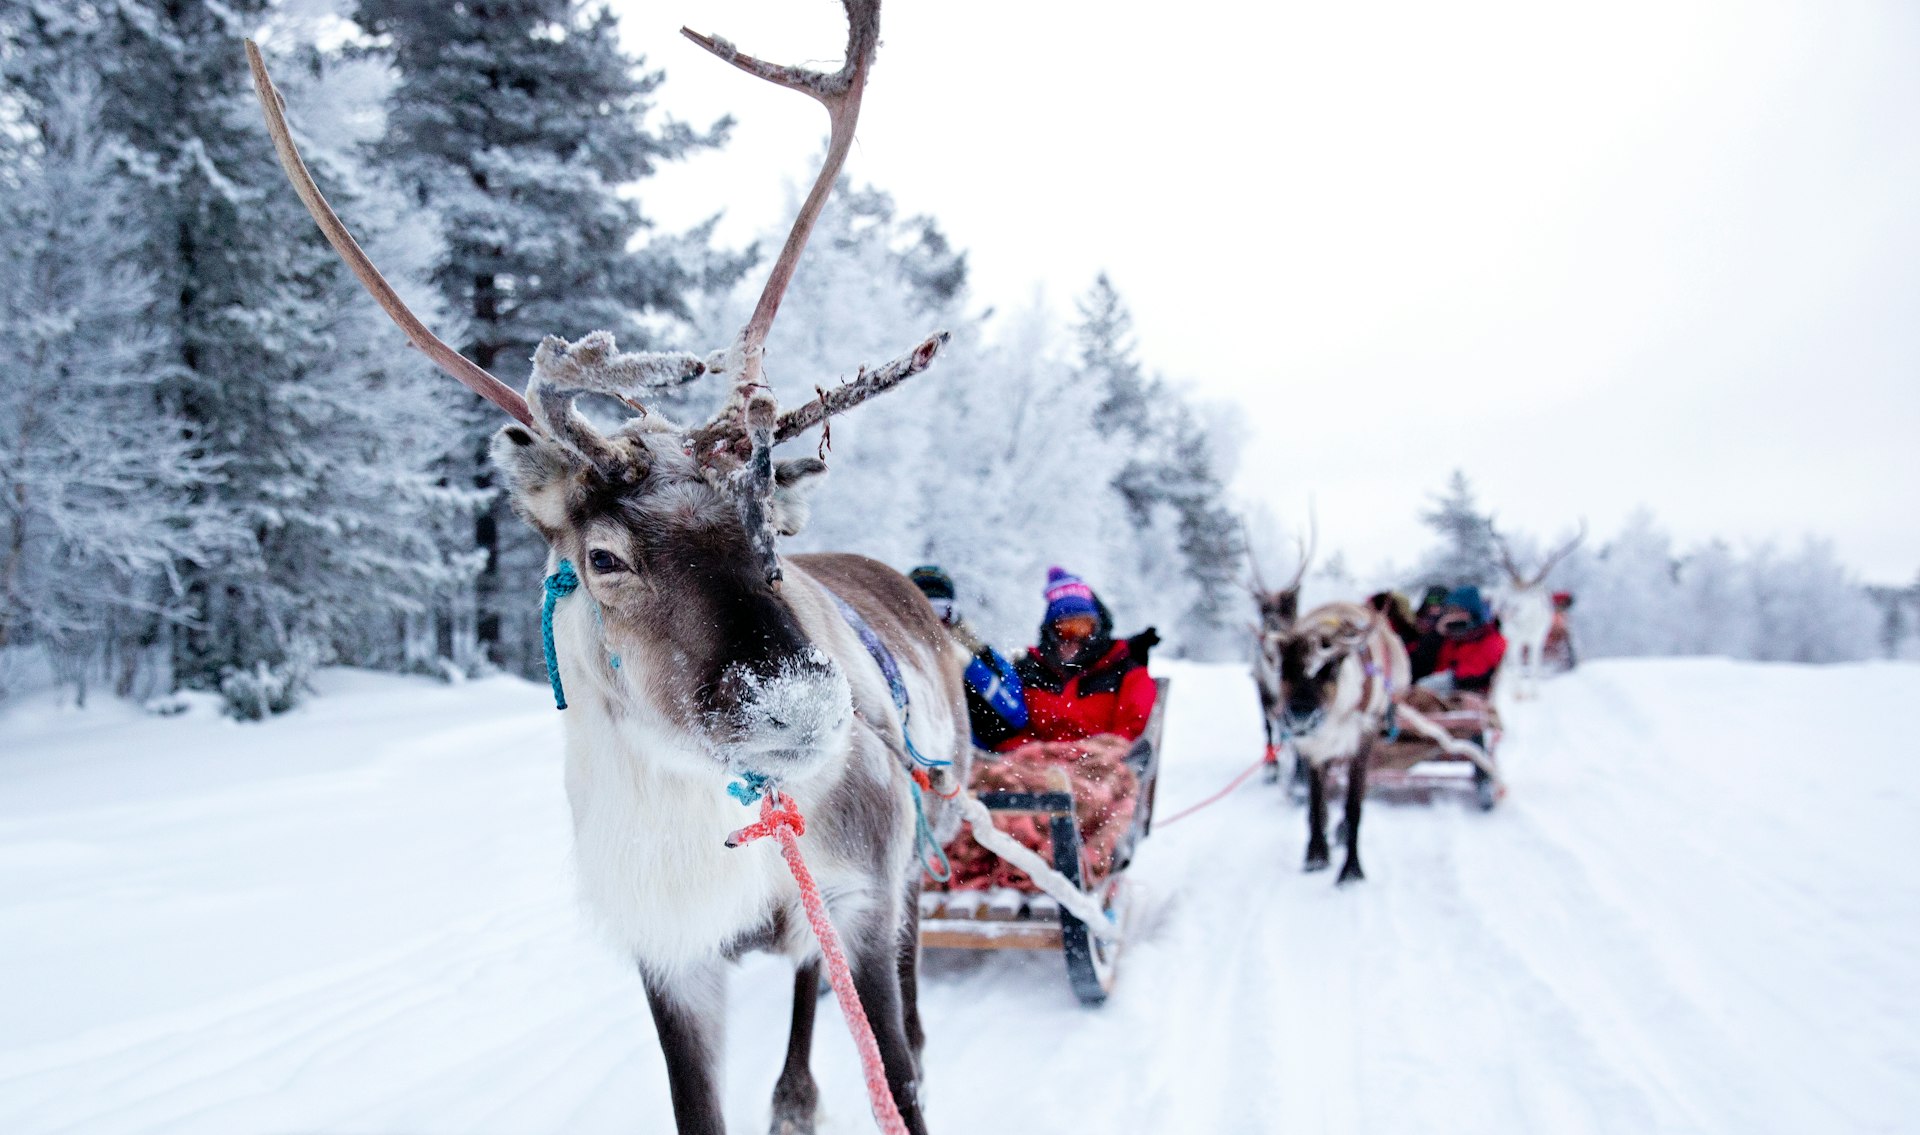 Reindeer pulling sleighs in the snowy landscape of Finnish Lapland